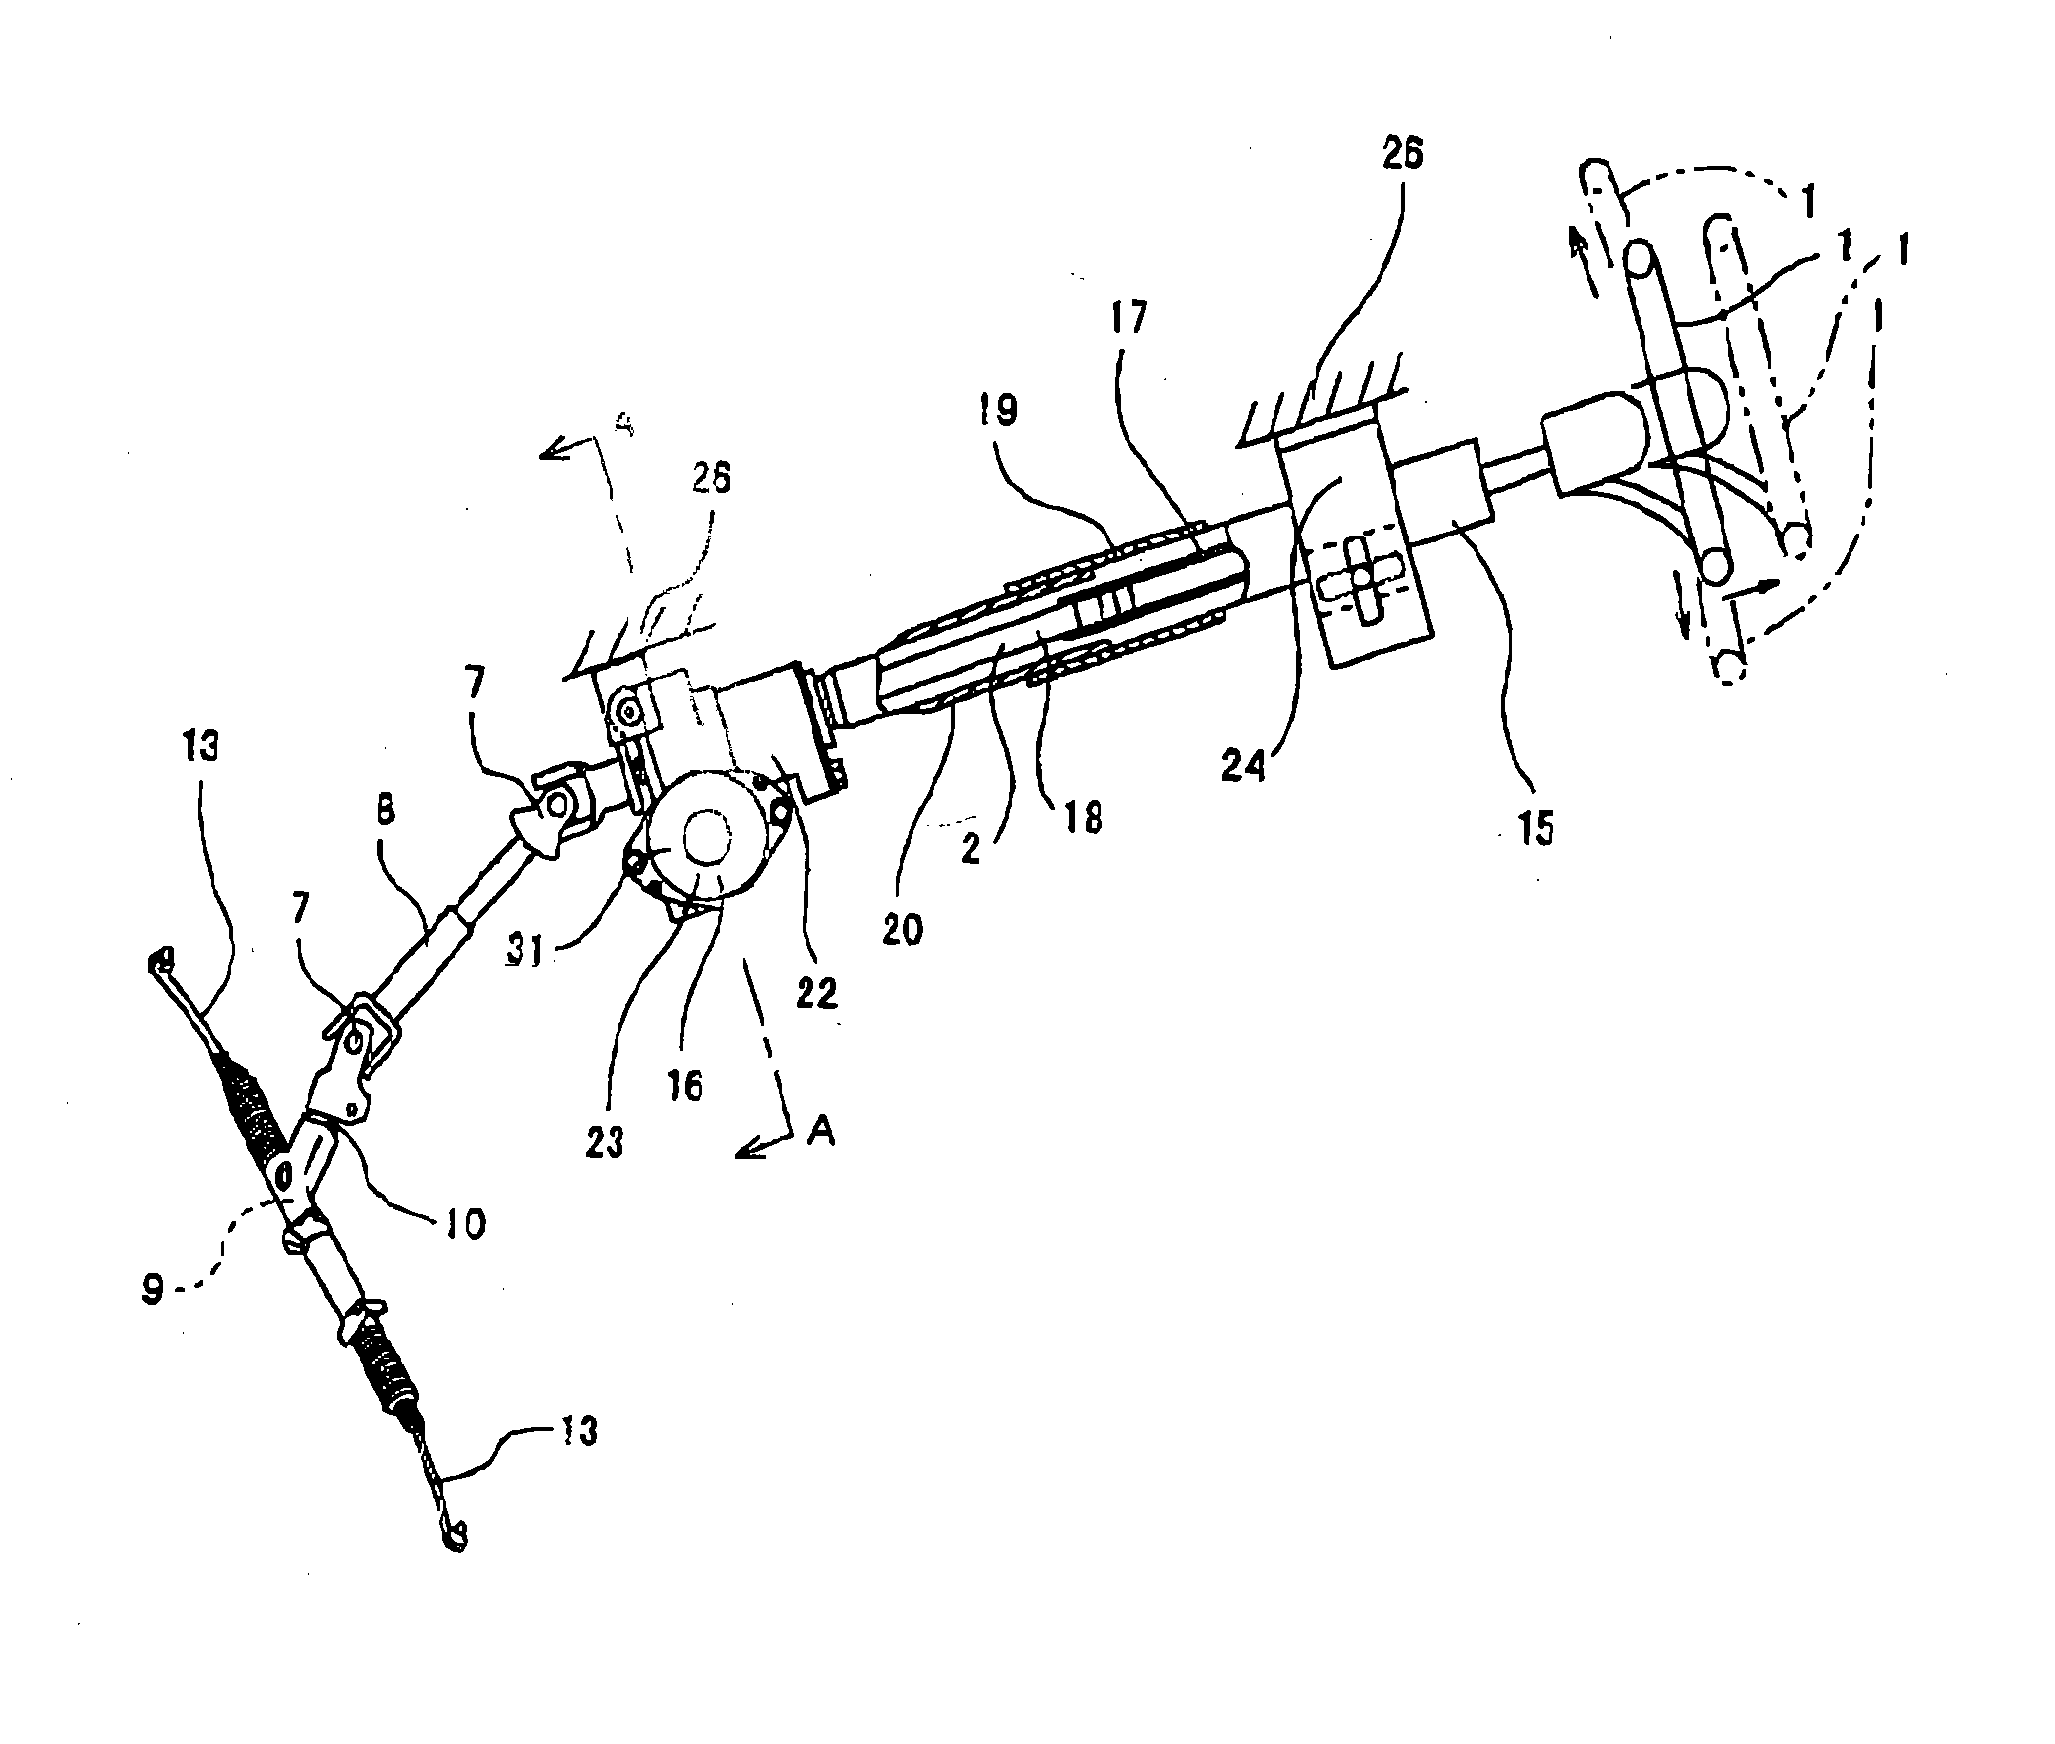 Electric-powered power steering apparatus